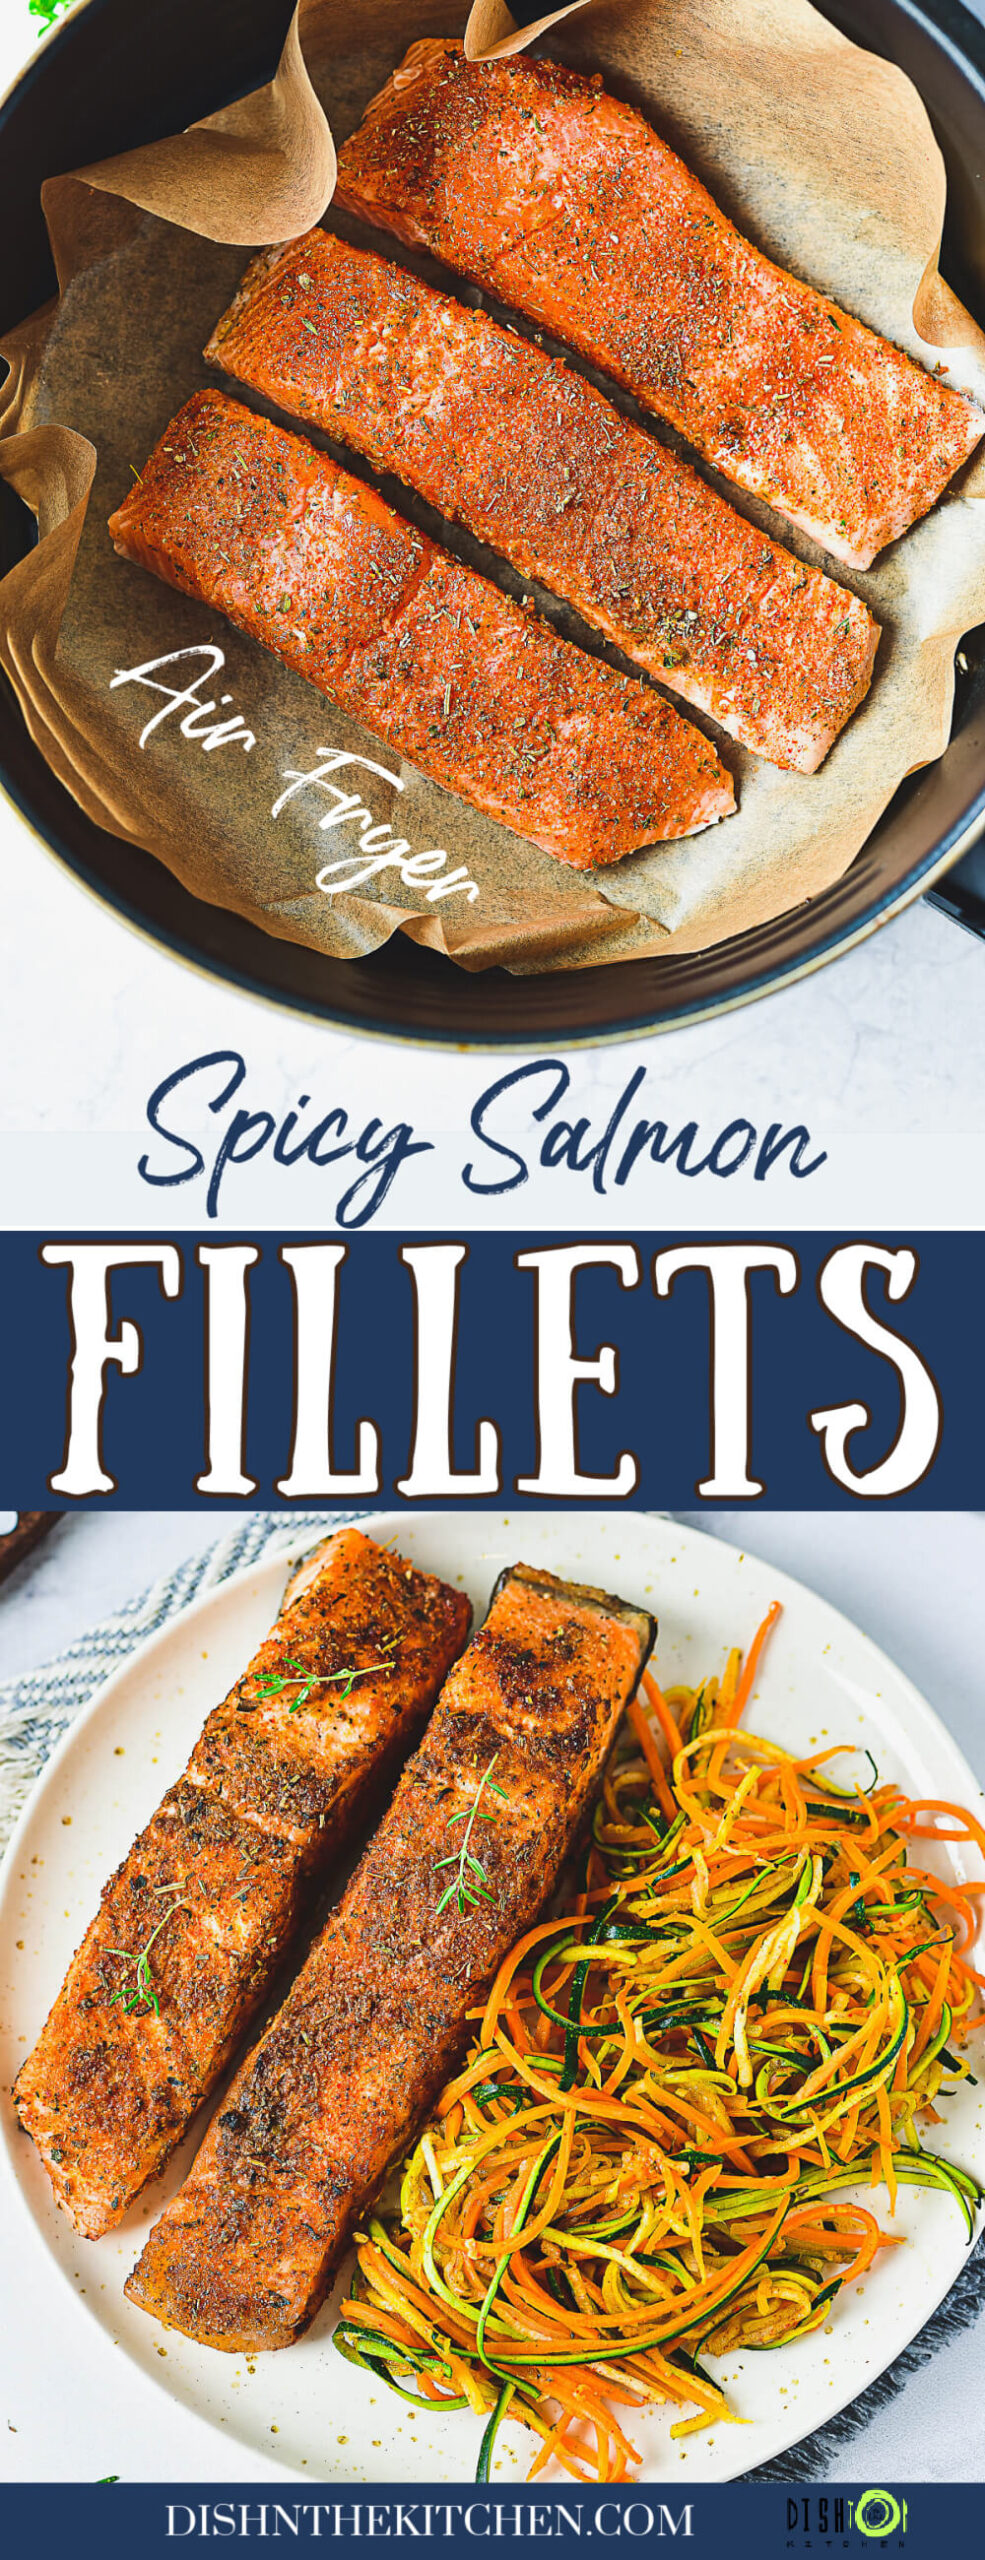 Pinterest image for air fryer salmon recipe featuring spiced salmon fillets in an air fryer and on a plate beside spiralized vegetables.